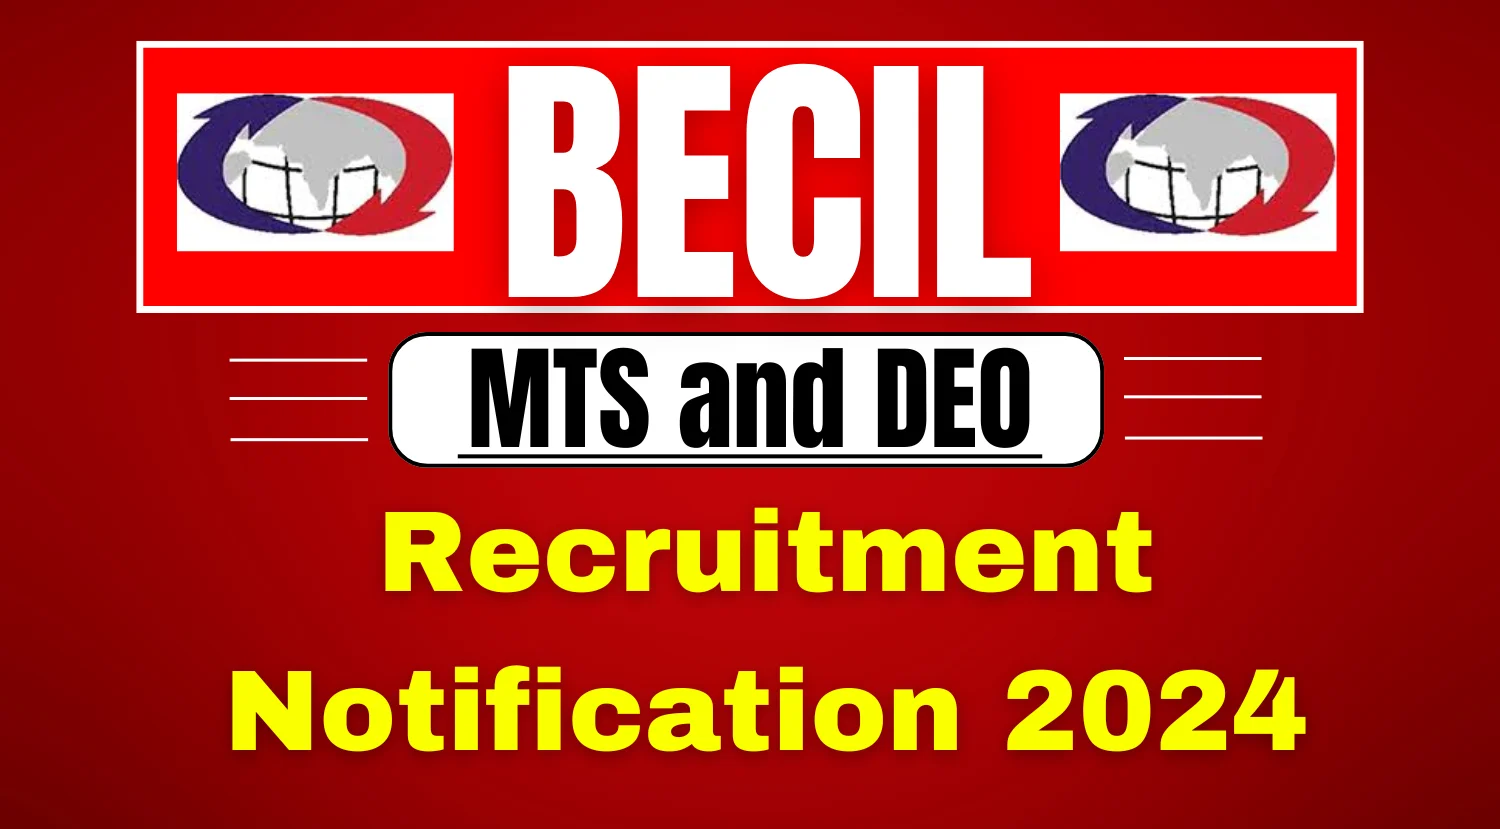 BECIL Recruitment 2024 Notification for Various MTS and DEO Post